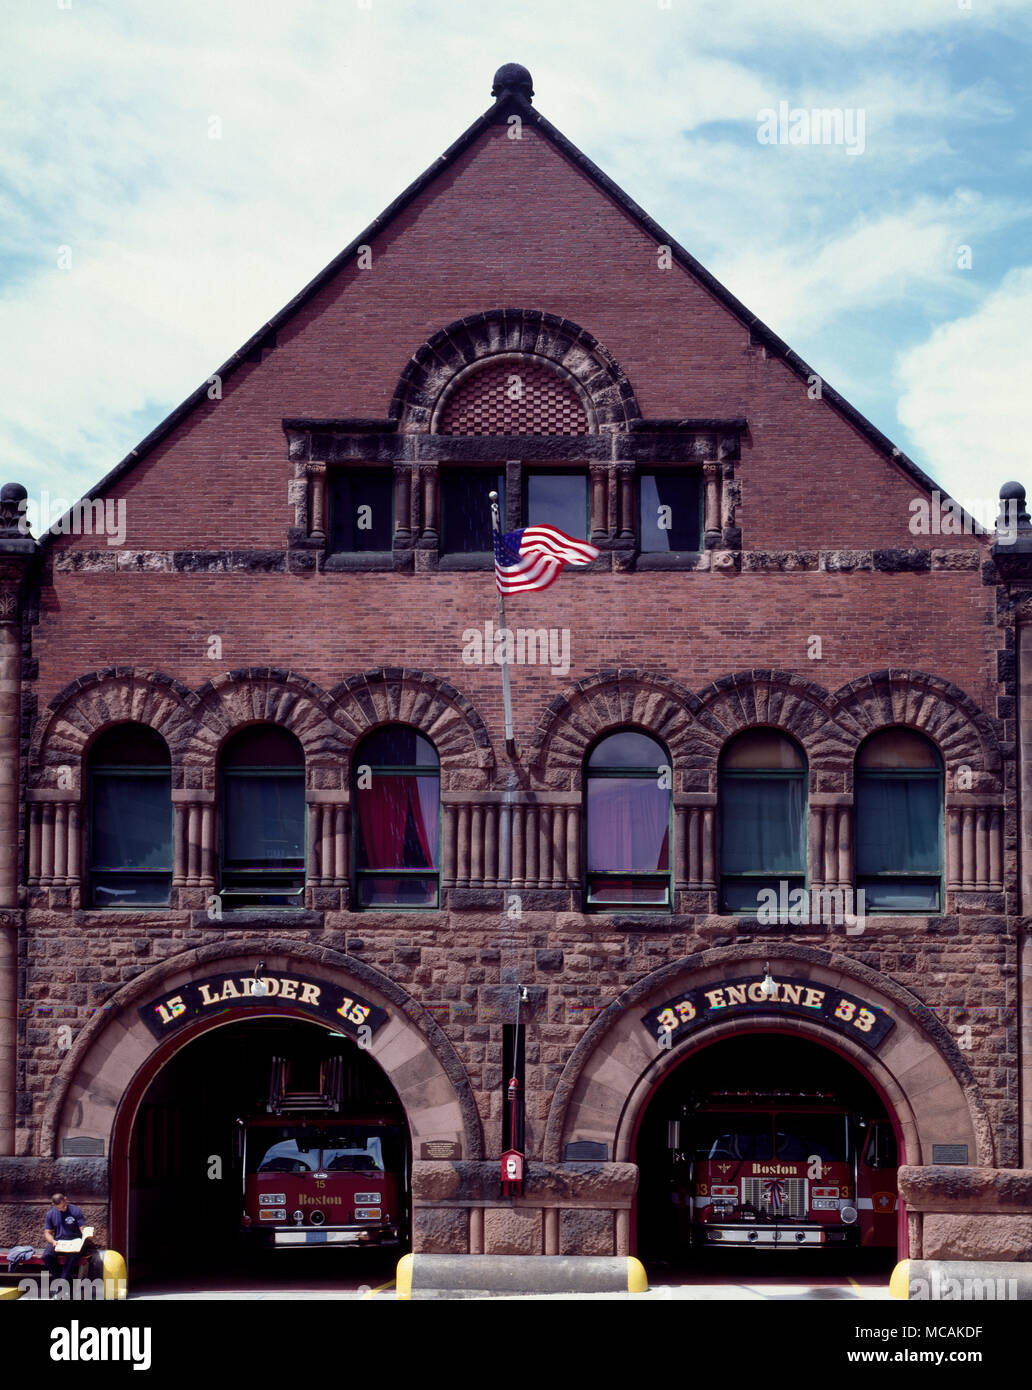 The Boston Fire Department traces its roots back to 1631, a year after the city was founded, when the first fire ordinance was adopted. In what then was the Massachusetts Bay Colony of the Kingdom of England, the city banned thatched roofs and wooden chimneys. However, it wasn't until 1653 that the first hand engine was appropriated to provide pressure for water lines Stock Photo